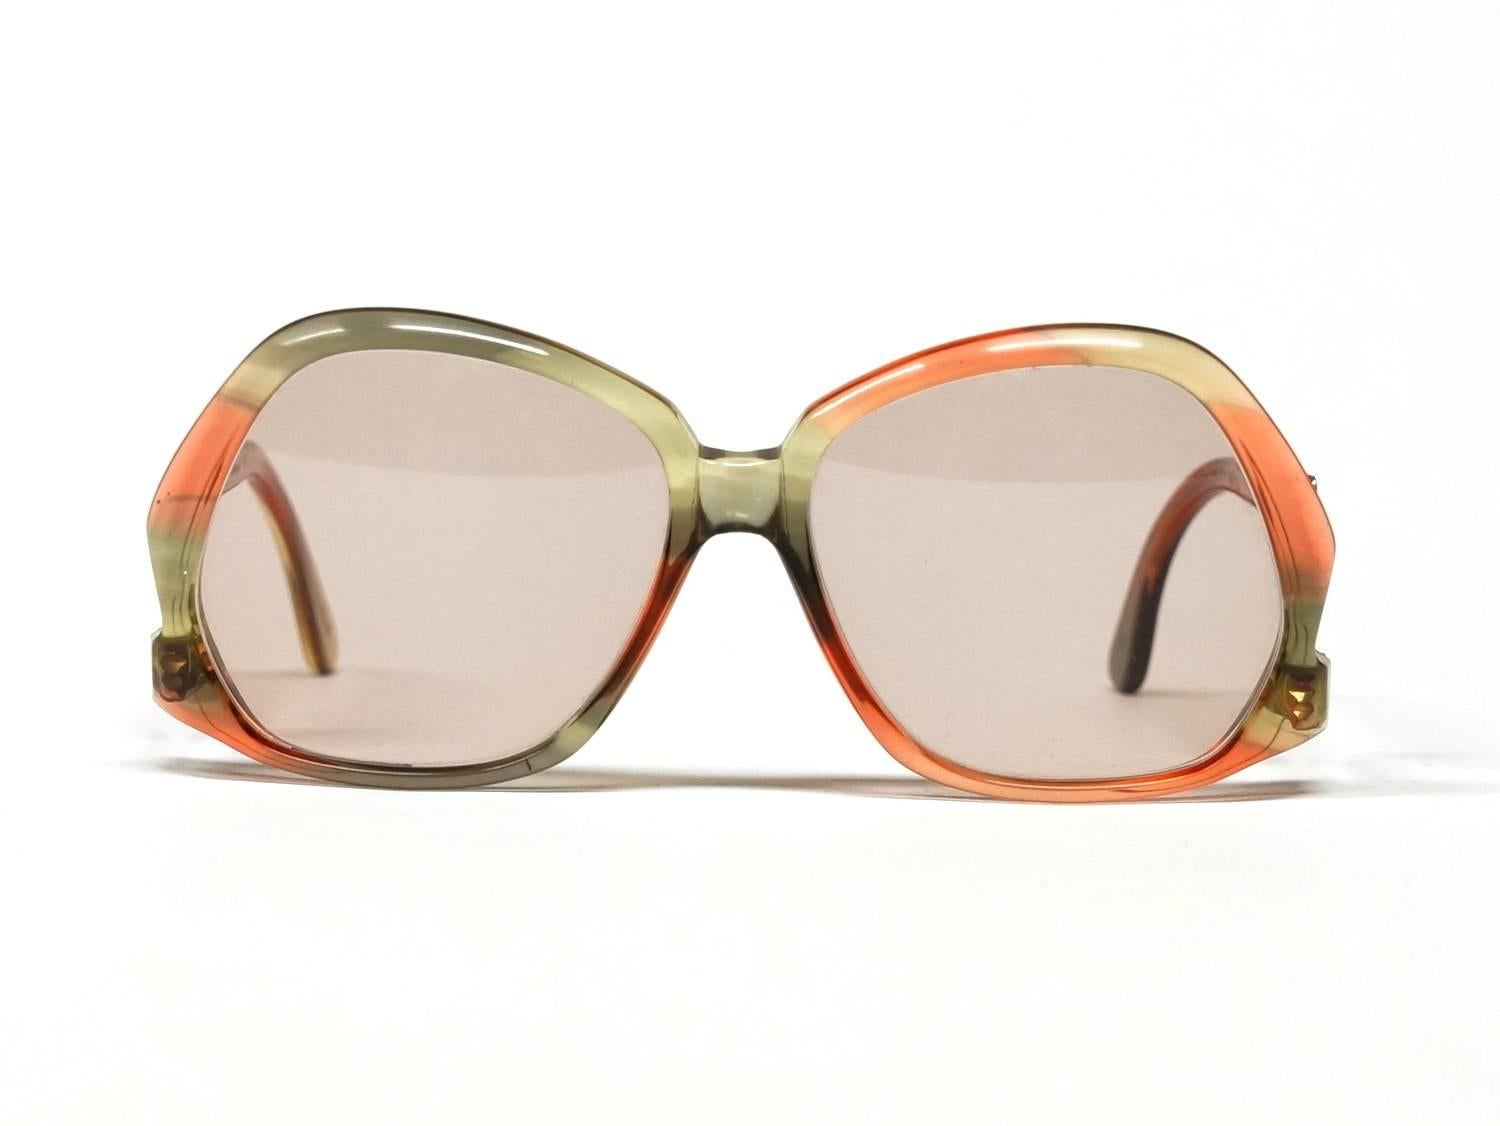 Flashy vintage sunglasses made in the 1970s by the German company Hampel. Green red translucent acetate frame with drop temples which swinging go up.

approximate dimensions: 
temple length: 135mm - 5 15/16